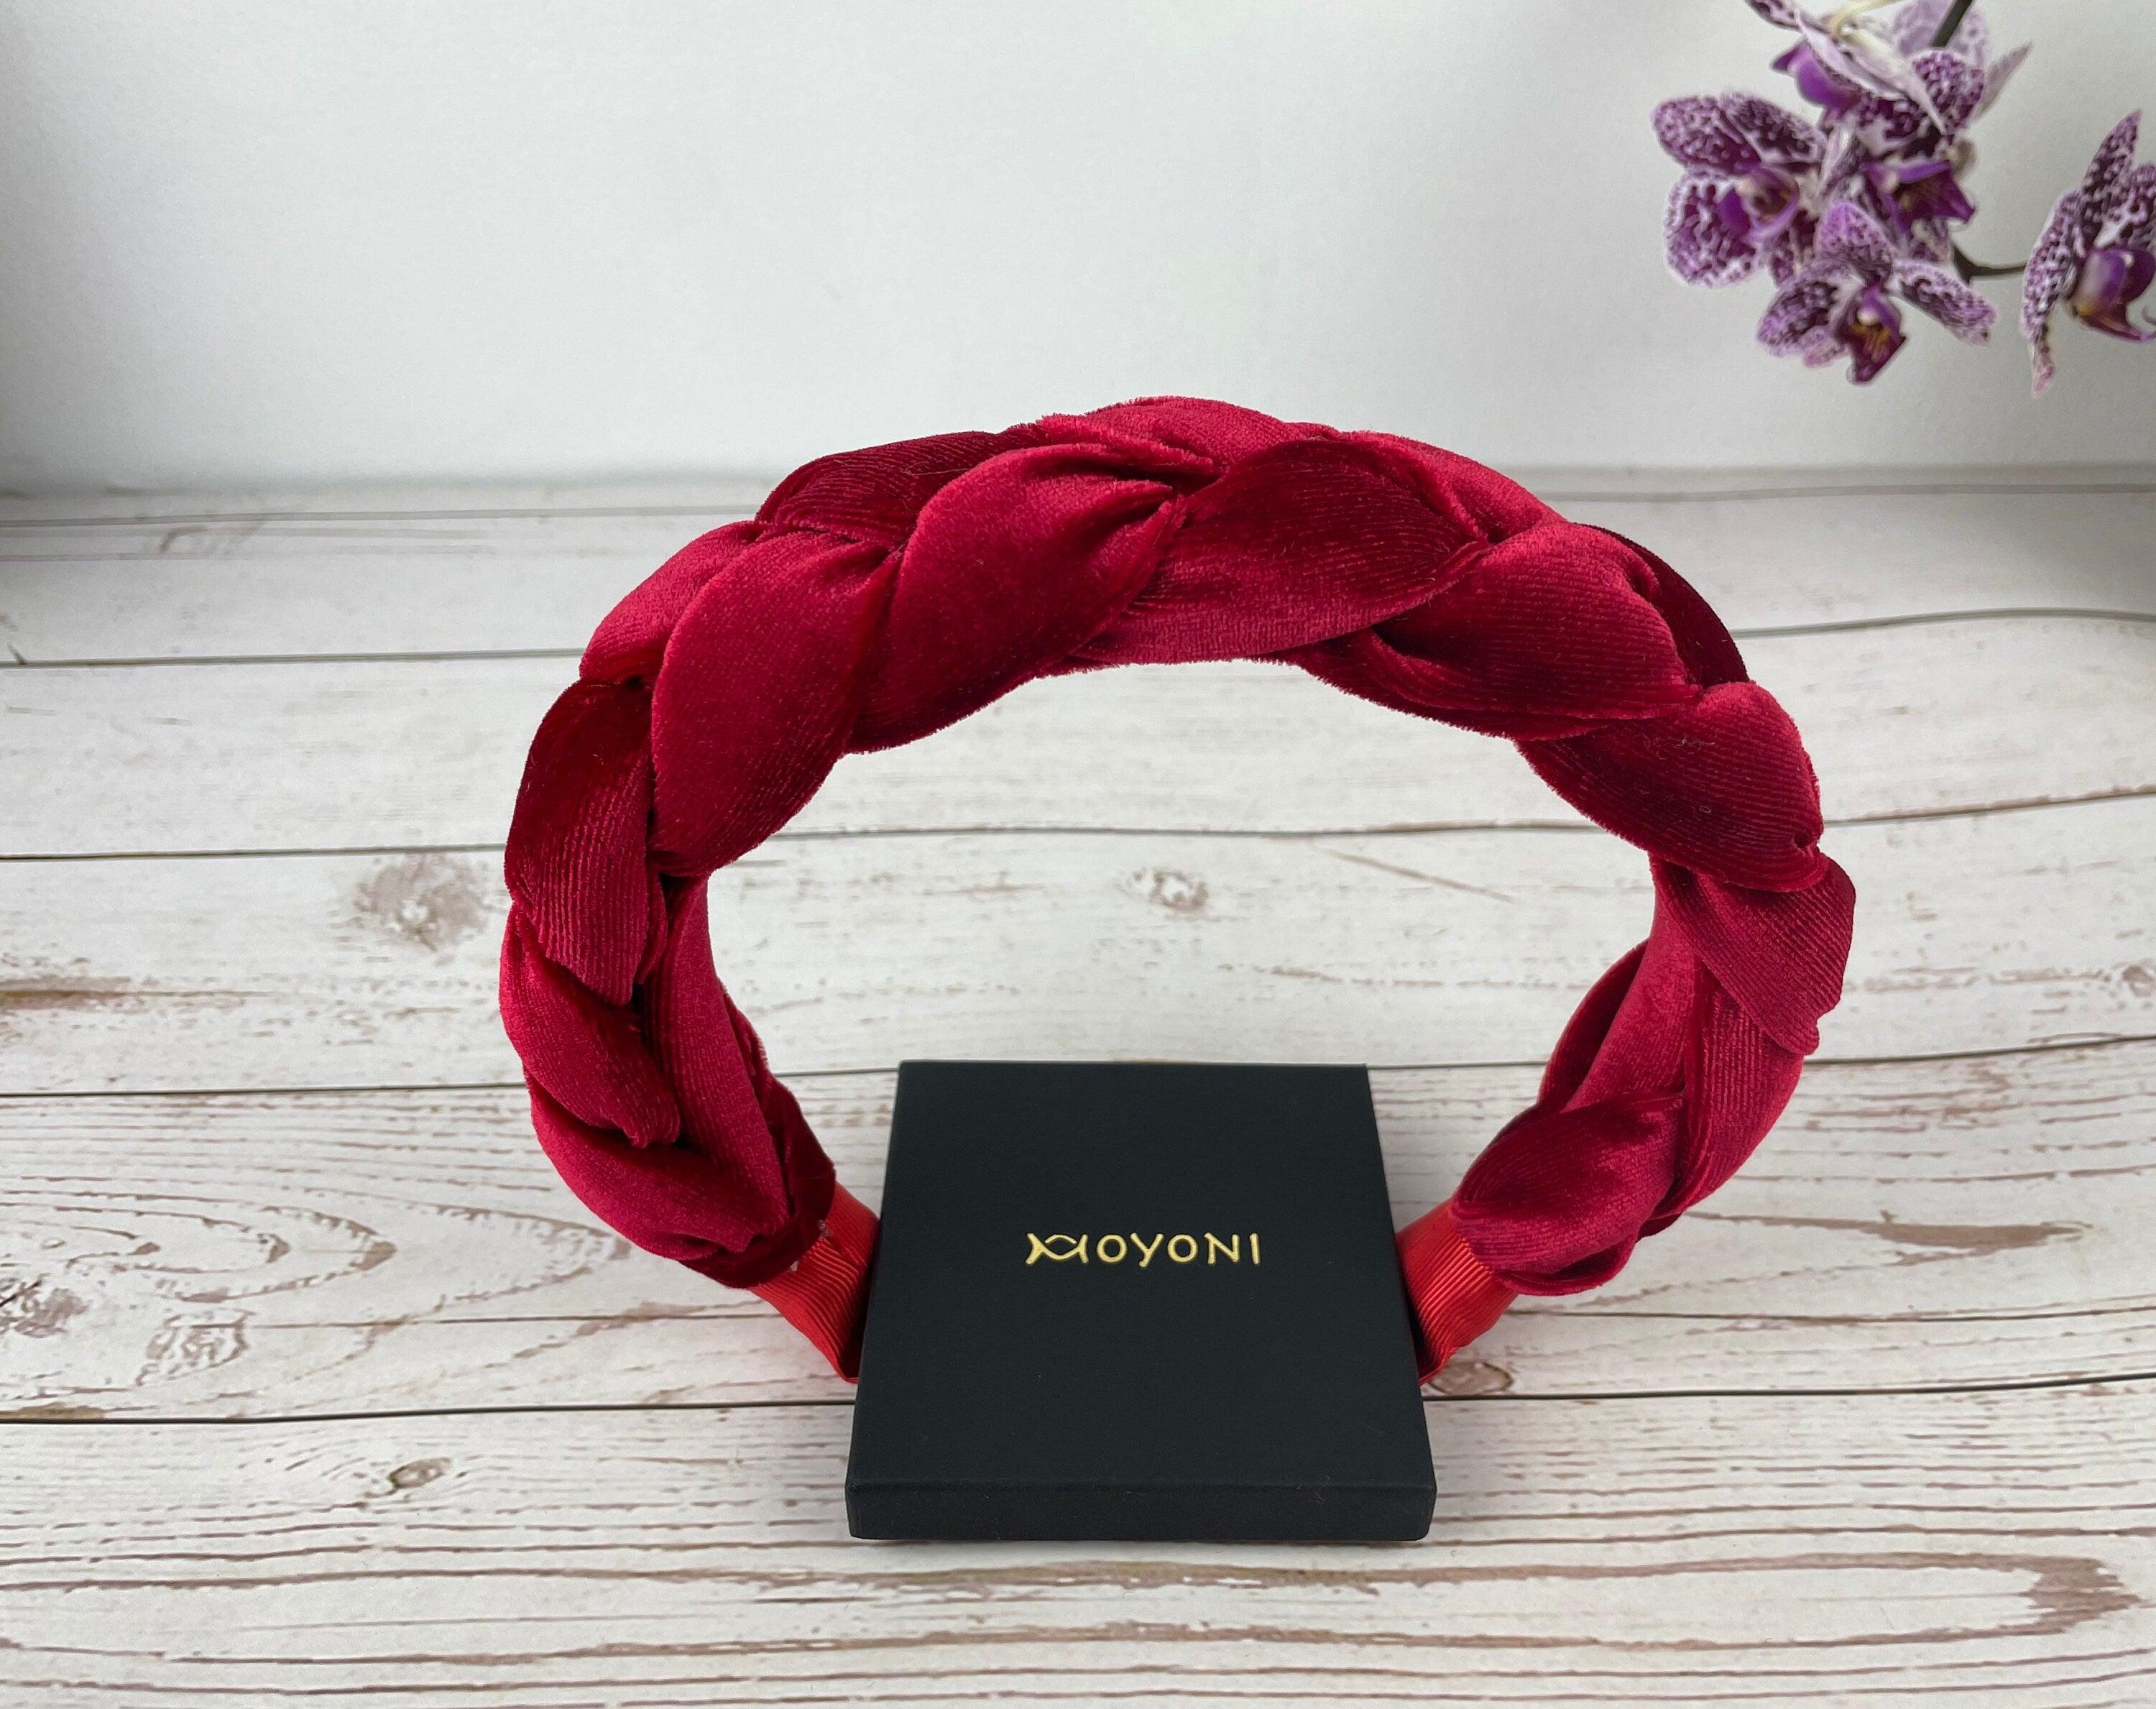 Beautiful Red Velvet Braided Headband for Women with Padded Stylish Design - Perfect Gift for Her - Handmade Hair Accessory available at Moyoni Design